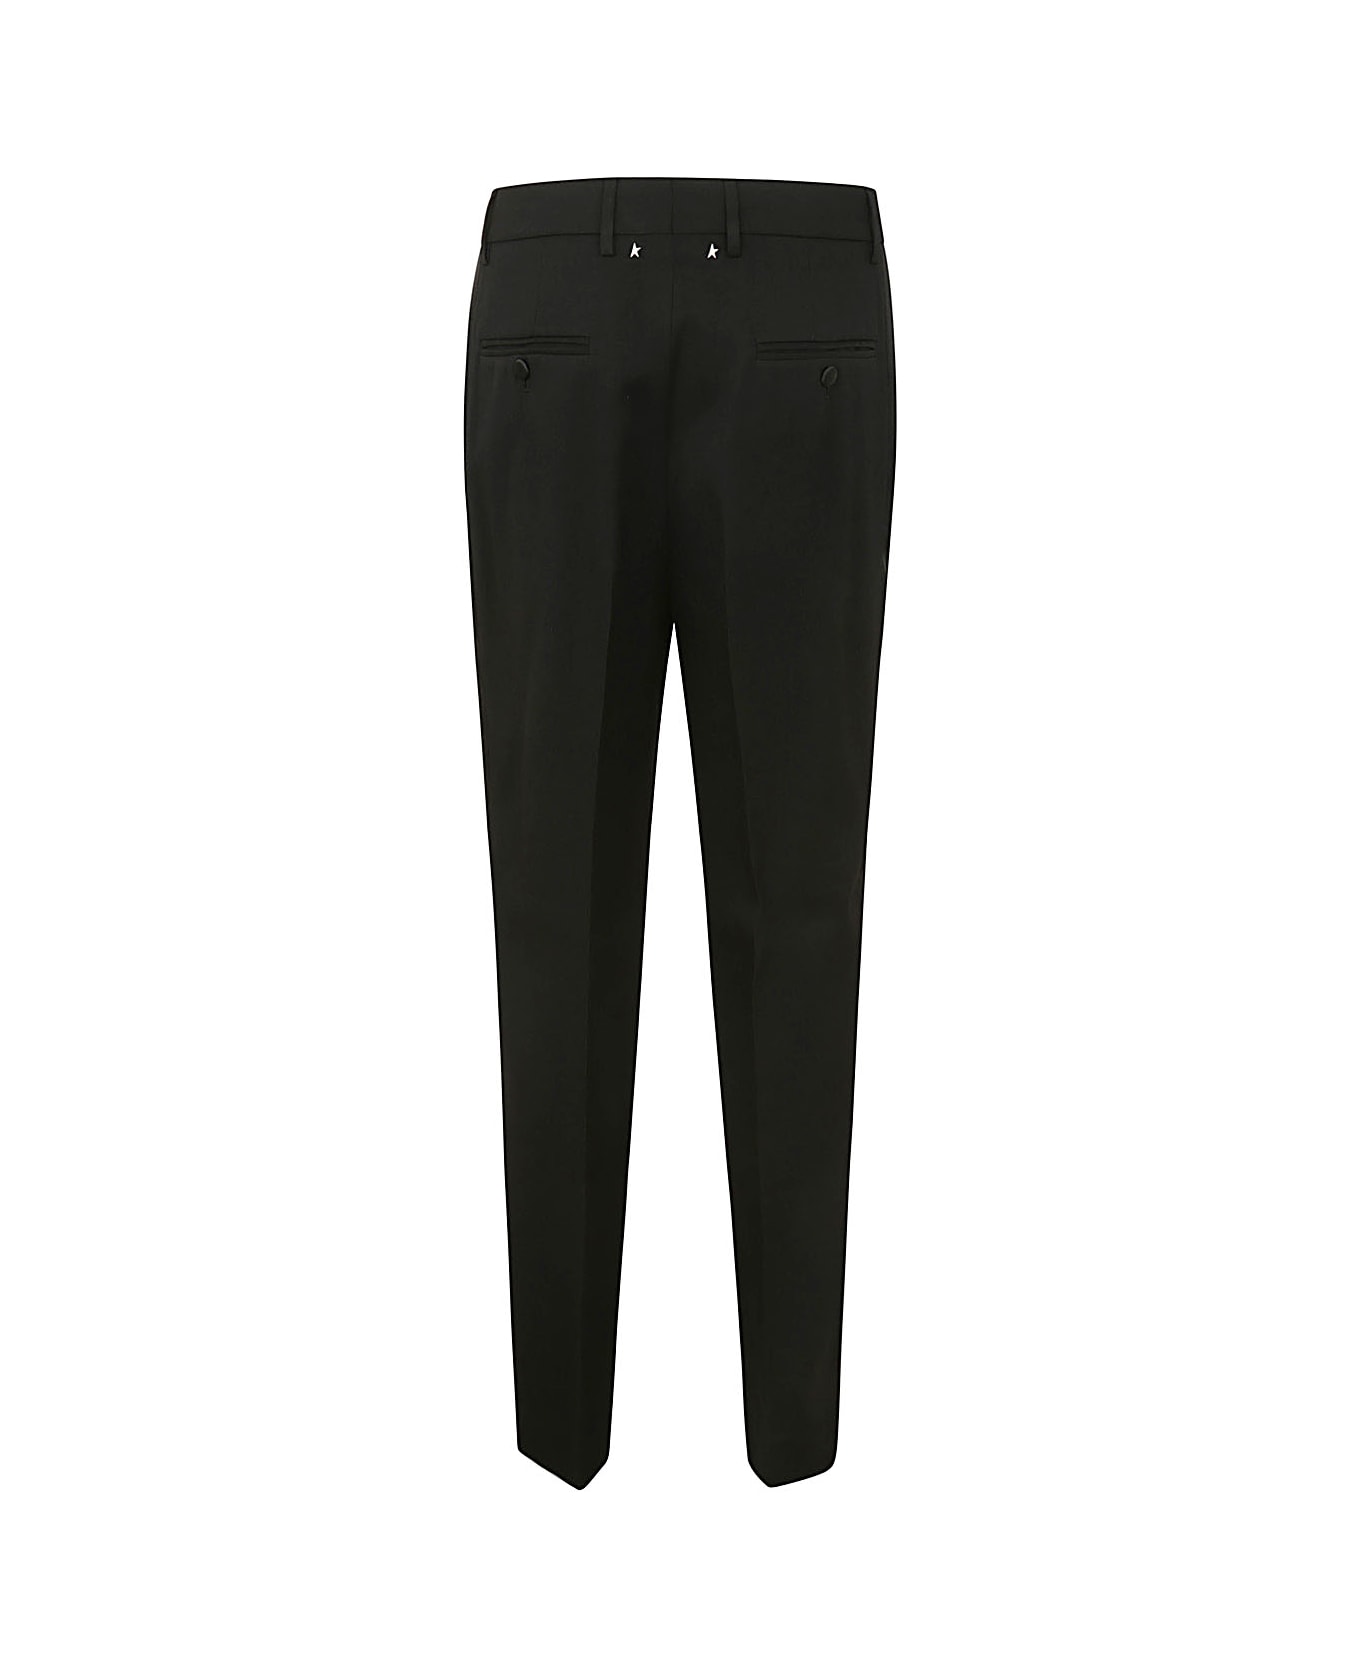 Golden Goose Relax Straight Pant - Black ボトムス